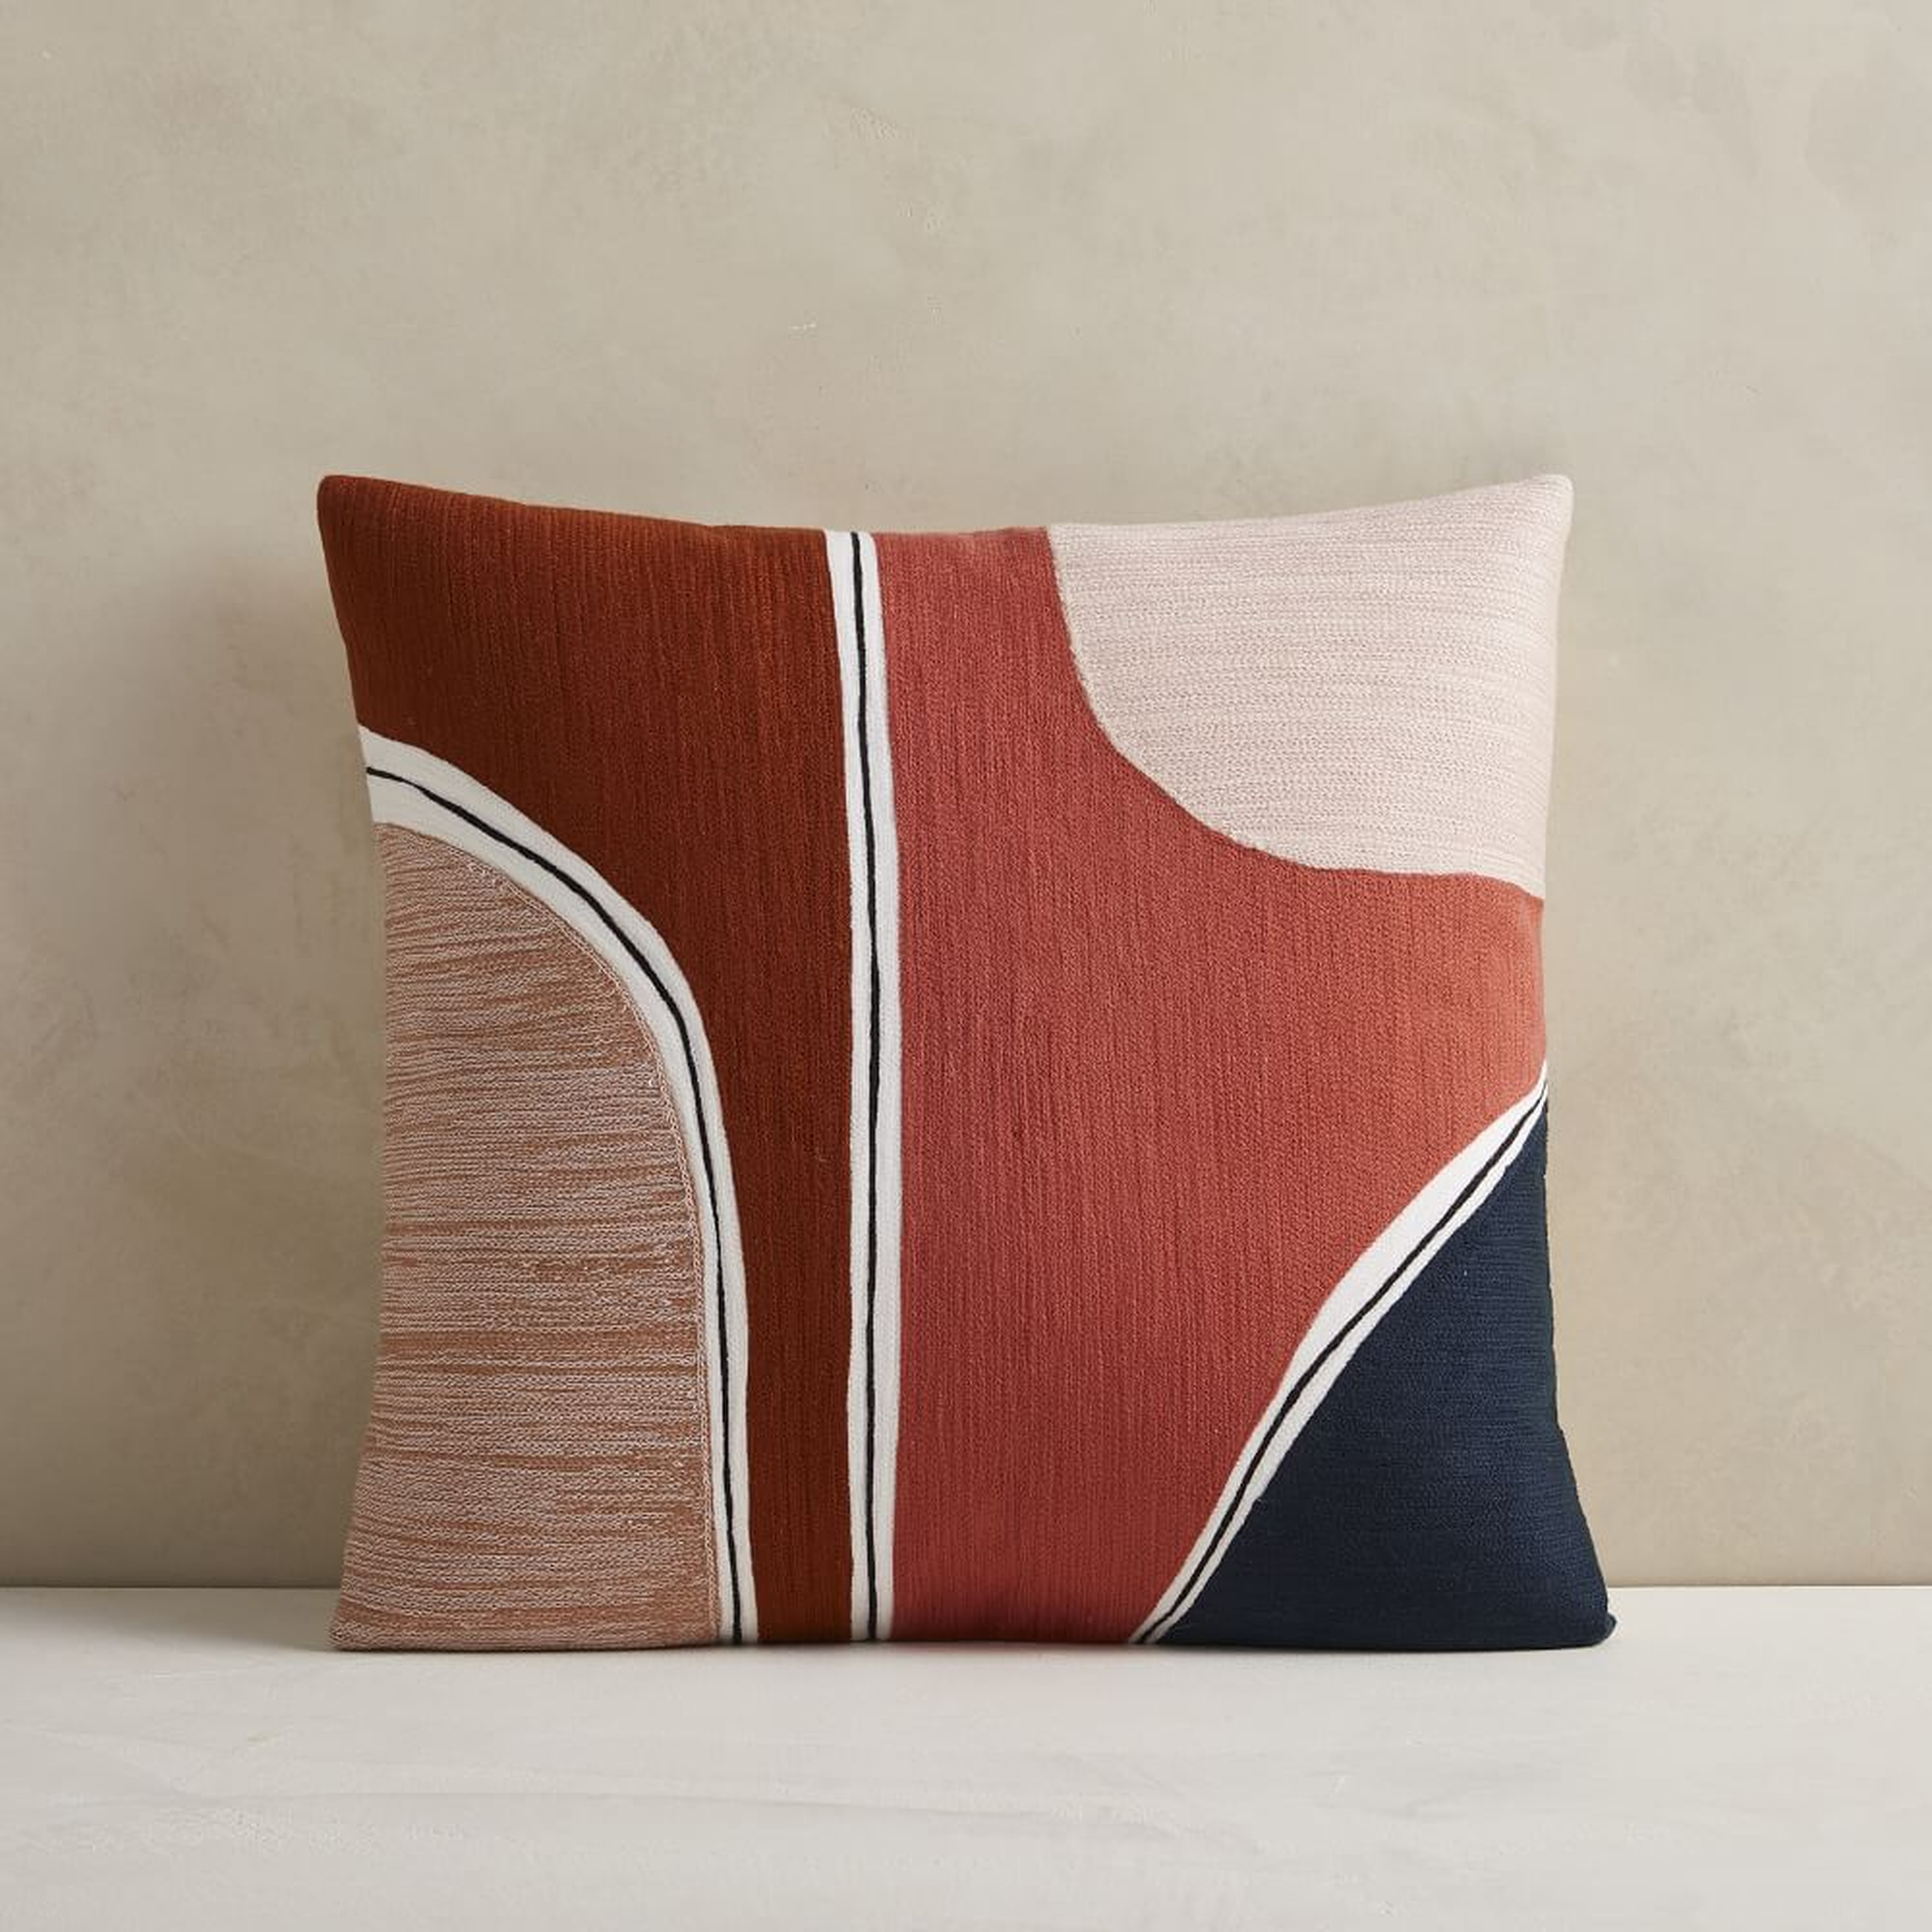 Crewel Outlined Shapes Pillow Cover, 20"x20", Multi - West Elm